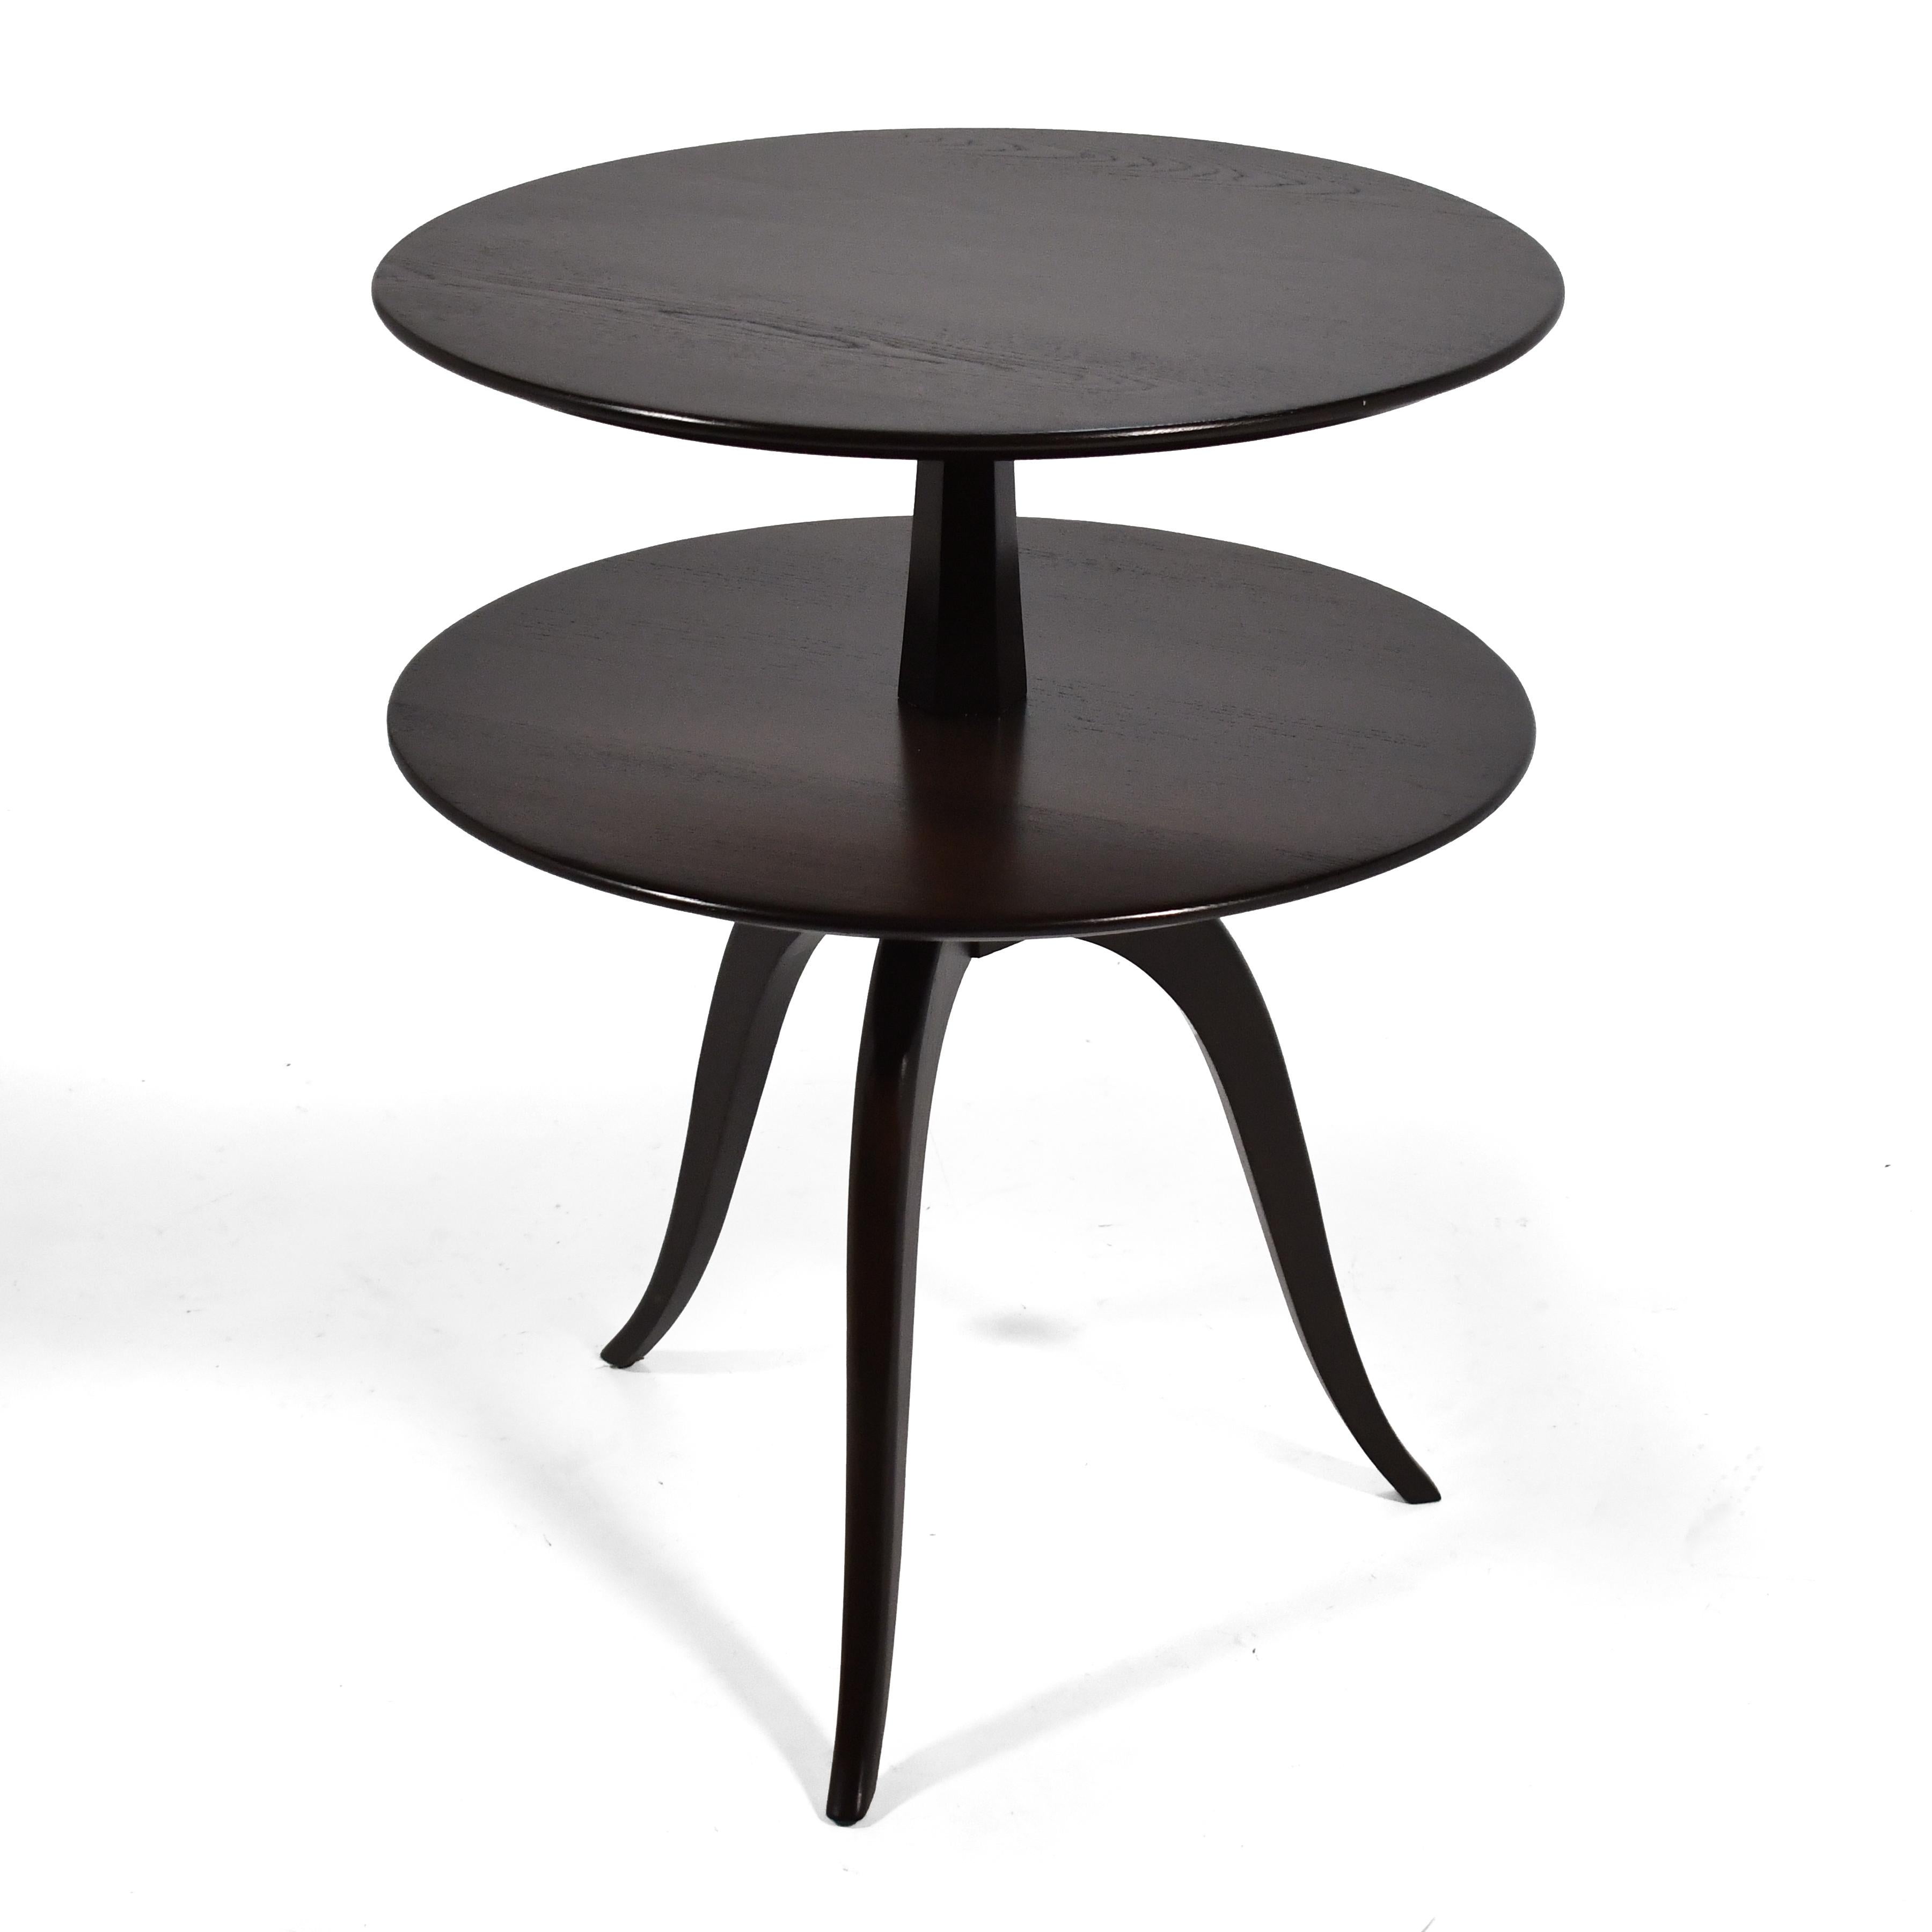 American Paul Frankl Two-Tiered Table by Brown-Saltman